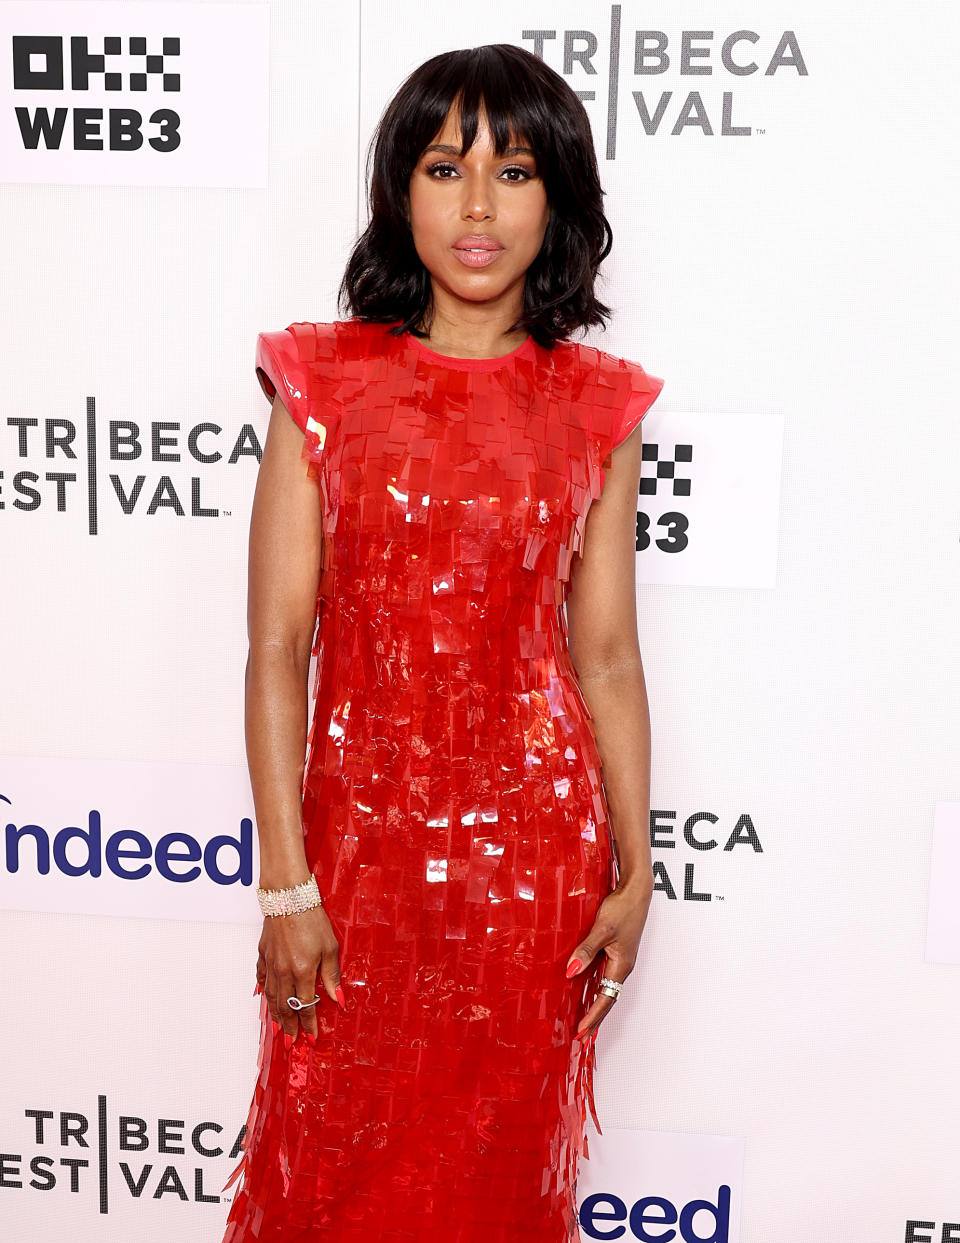 Kerry Washington poses on the red carpet at the Tribeca Festival. She is wearing a sleeveless, textured red dress